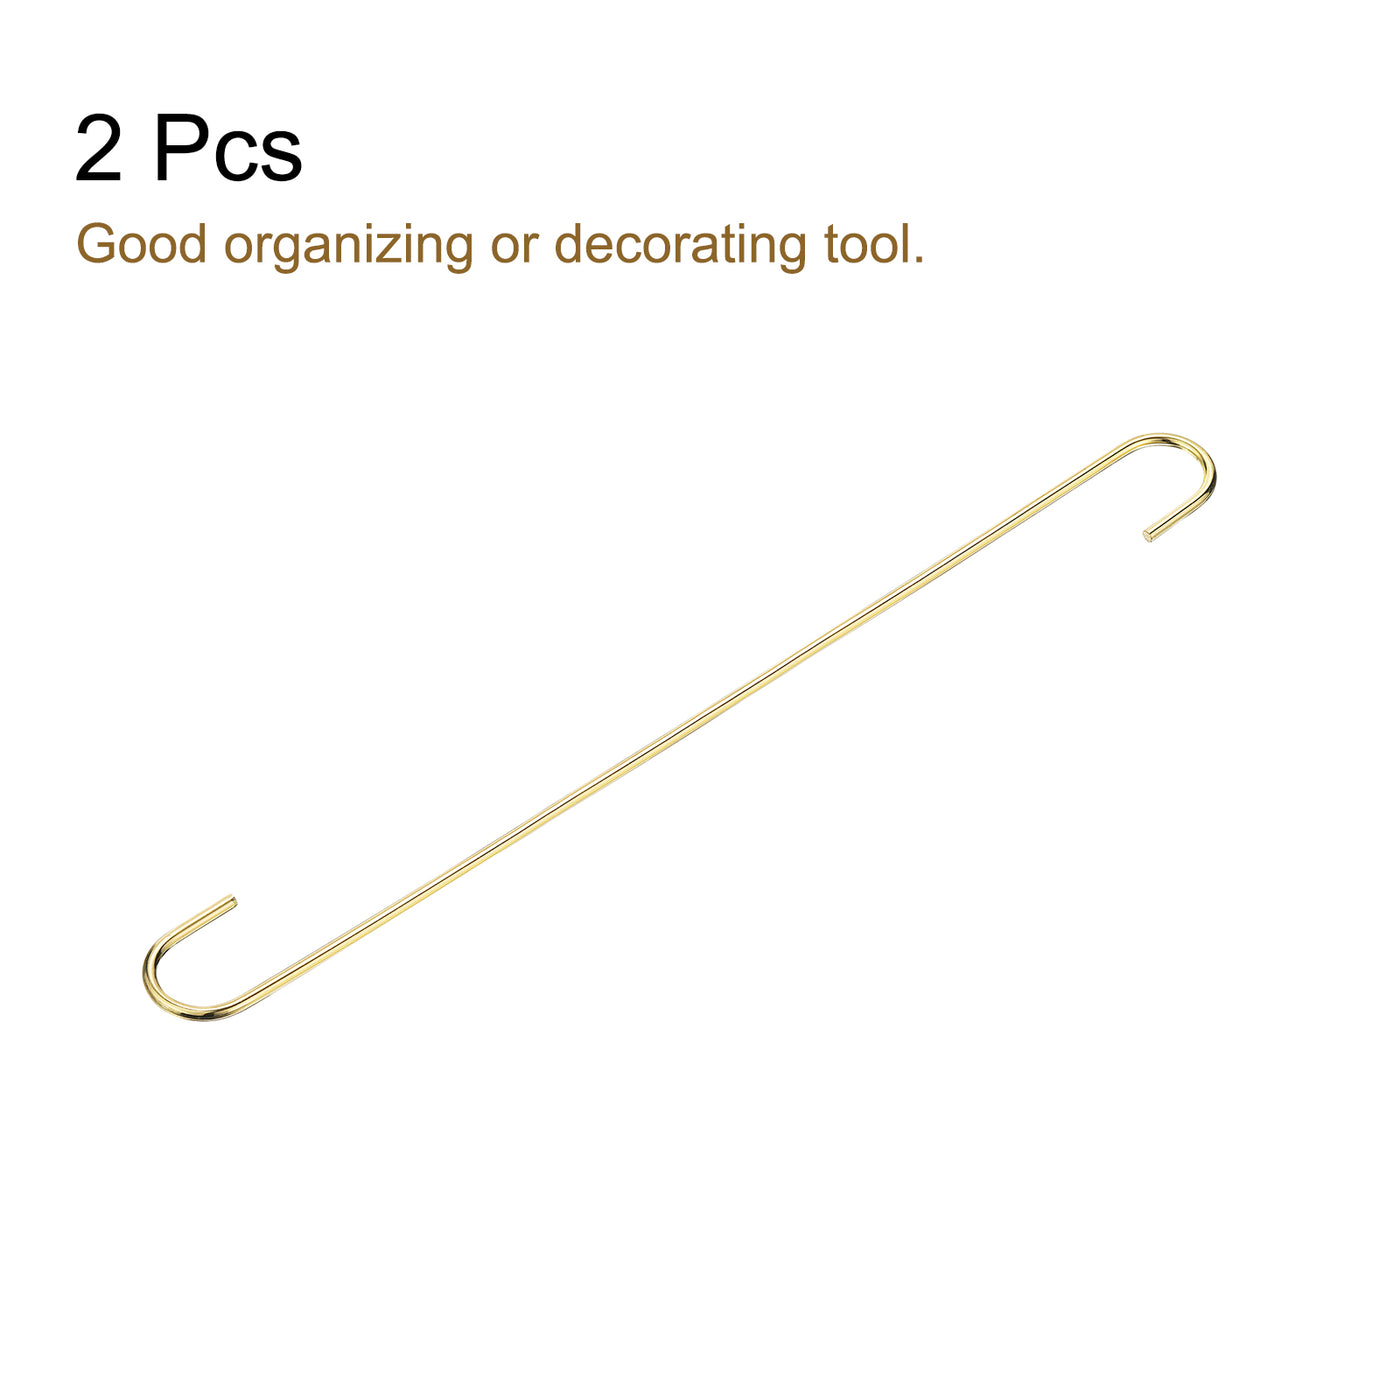 uxcell Uxcell S Hanging Hooks, 16inch(400mm) Extra Long Steel Hanger, Indoor Outdoor Uses for Garden, Bathroom, Closet, Workshop, Kitchen, Gold Tone, 2Pcs